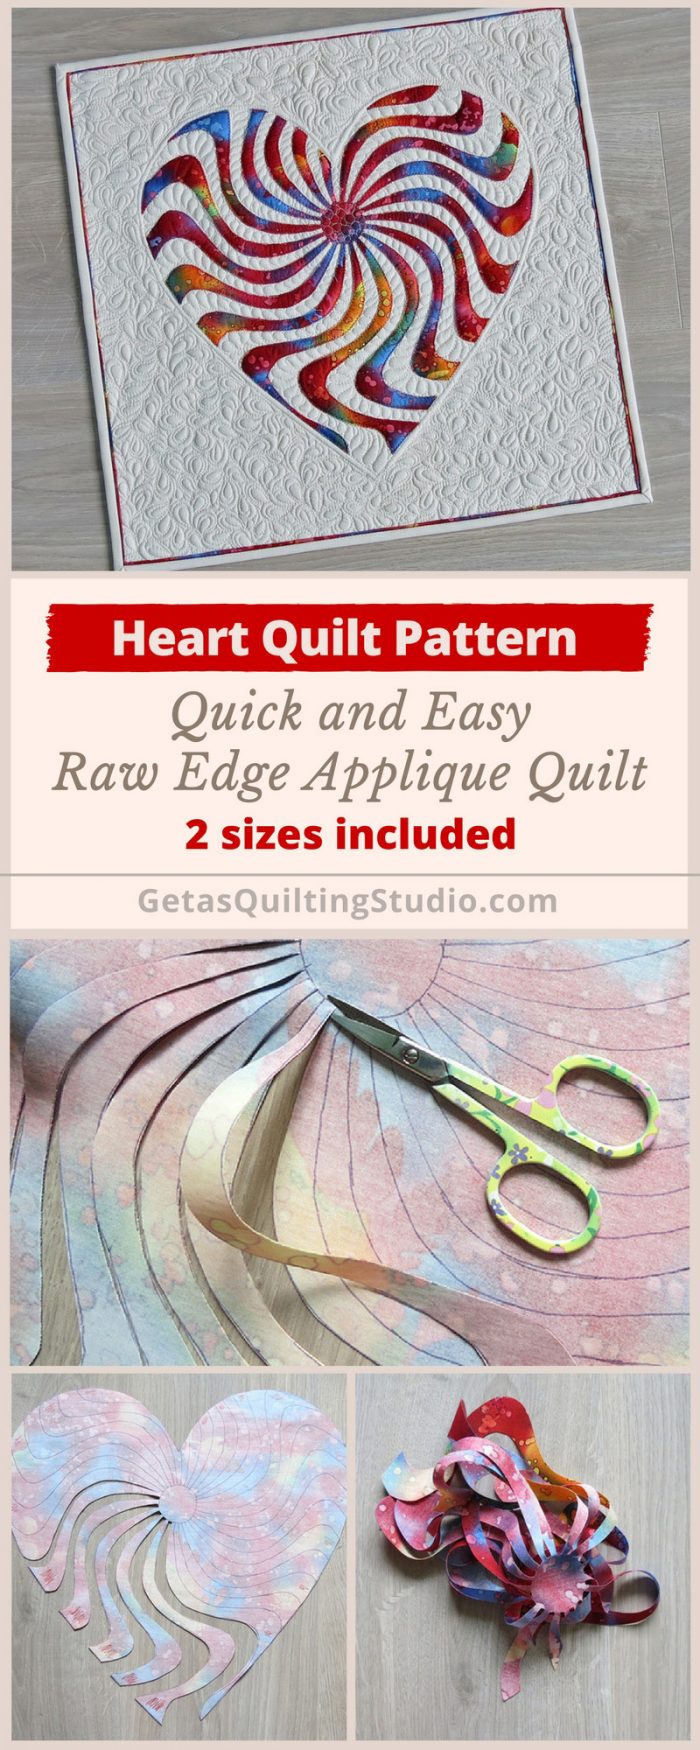 Applique heart quilt pattern - quick and easy technique for a small raw edge applique quilt. 2 sizes are included.